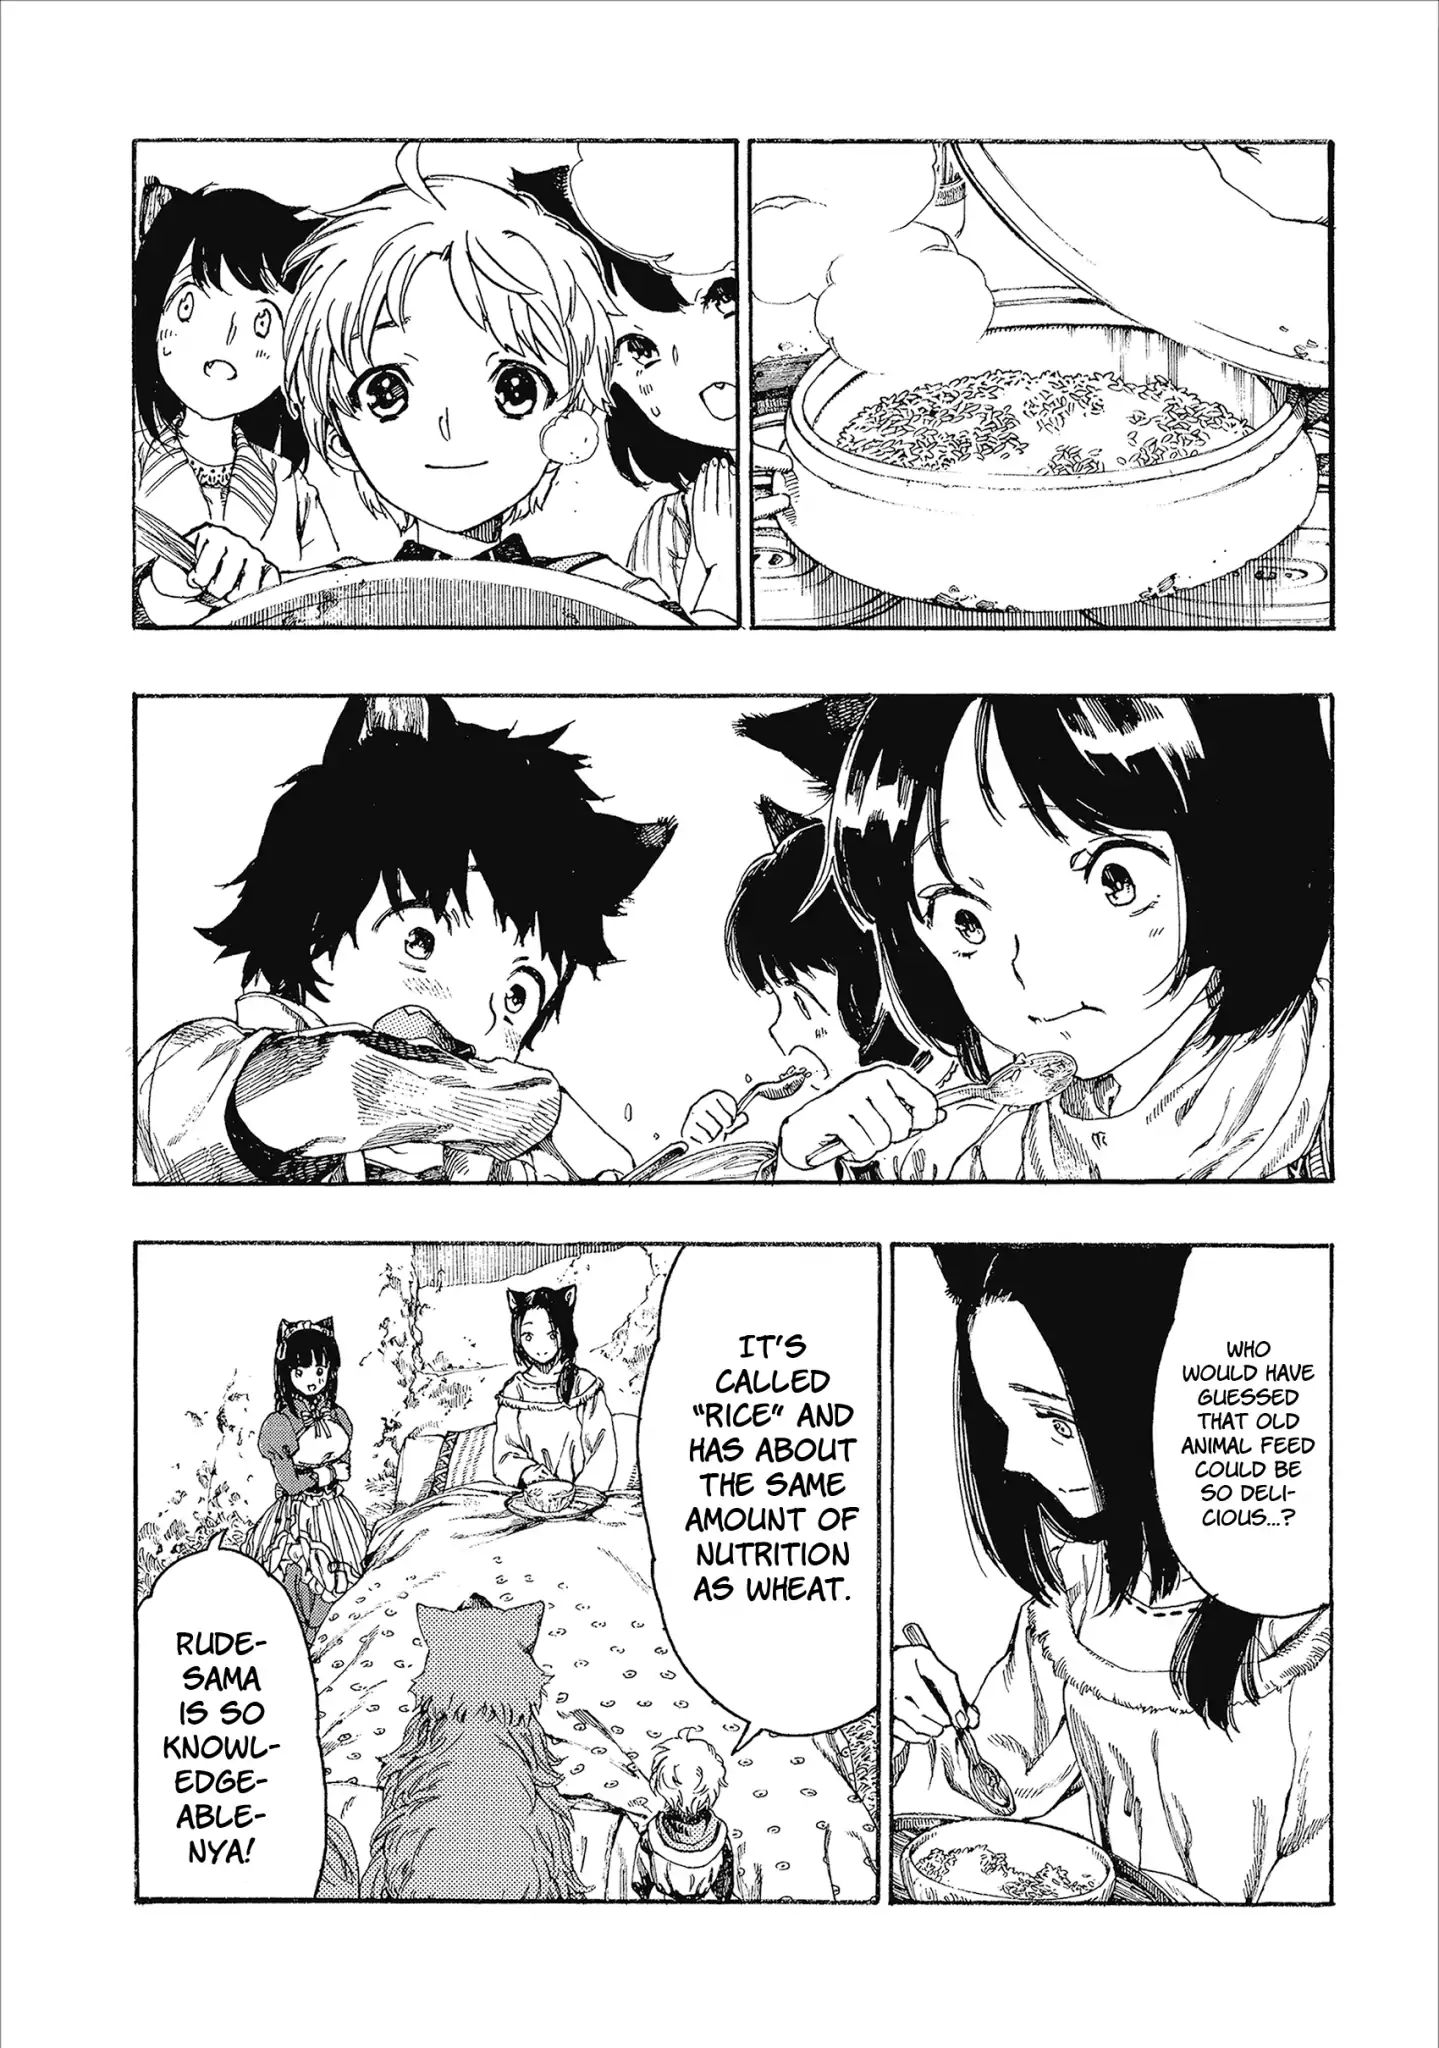 Heart-Warming Meals With Mother Fenrir - Page 2